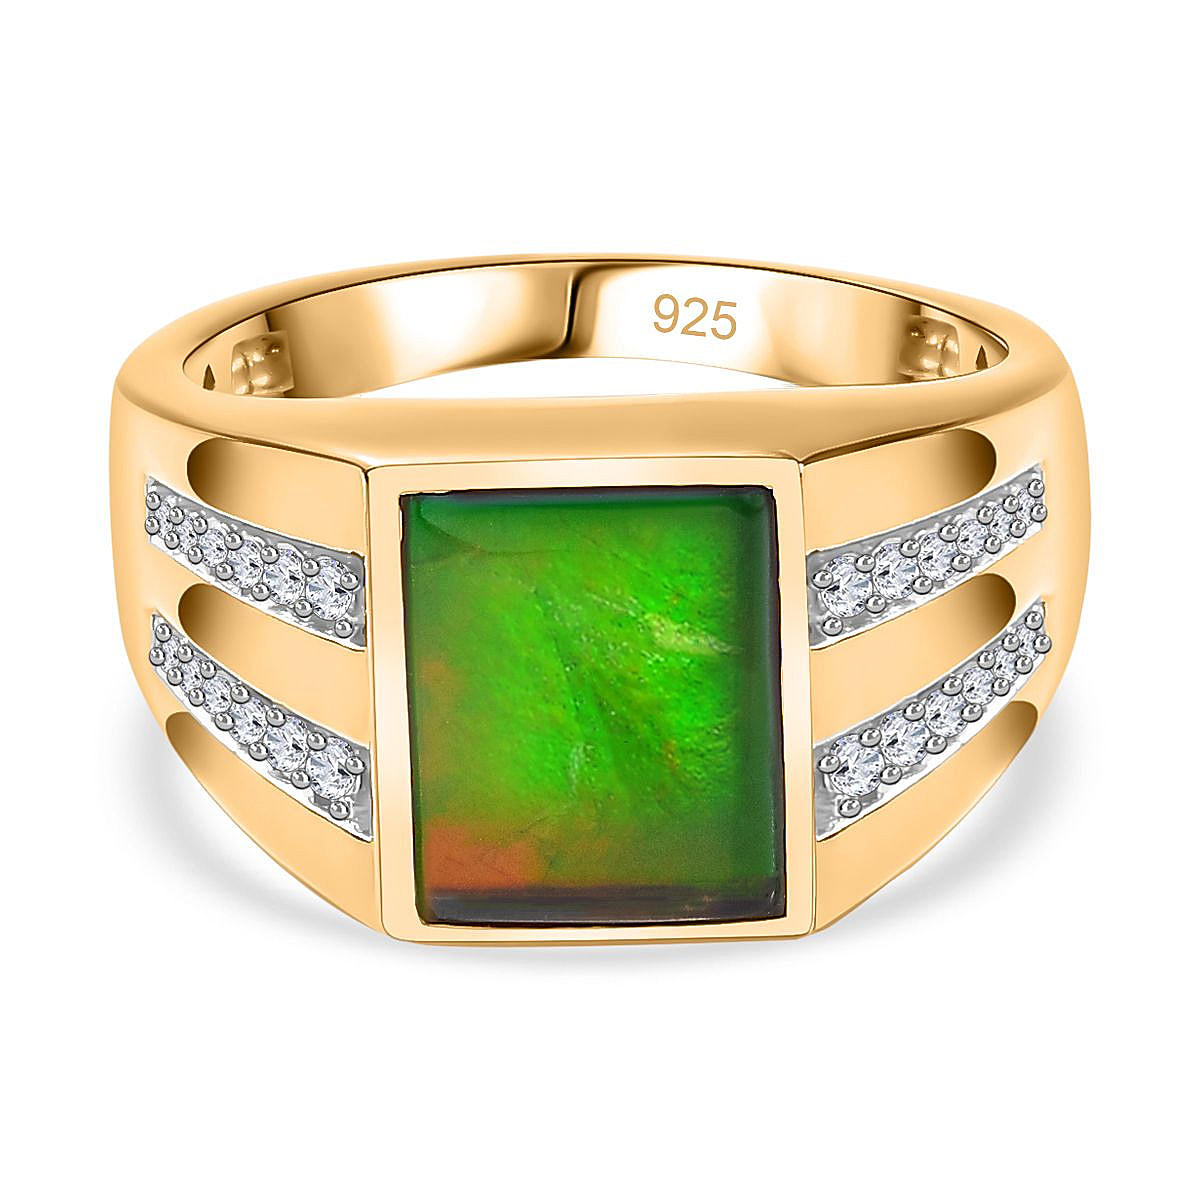 The Rare Find - Ammolite & Natural Zircon Ring in 18K Vermeil YG Plated Sterling Silver 2.73 Ct, Silver Wt. 6.72 Gms